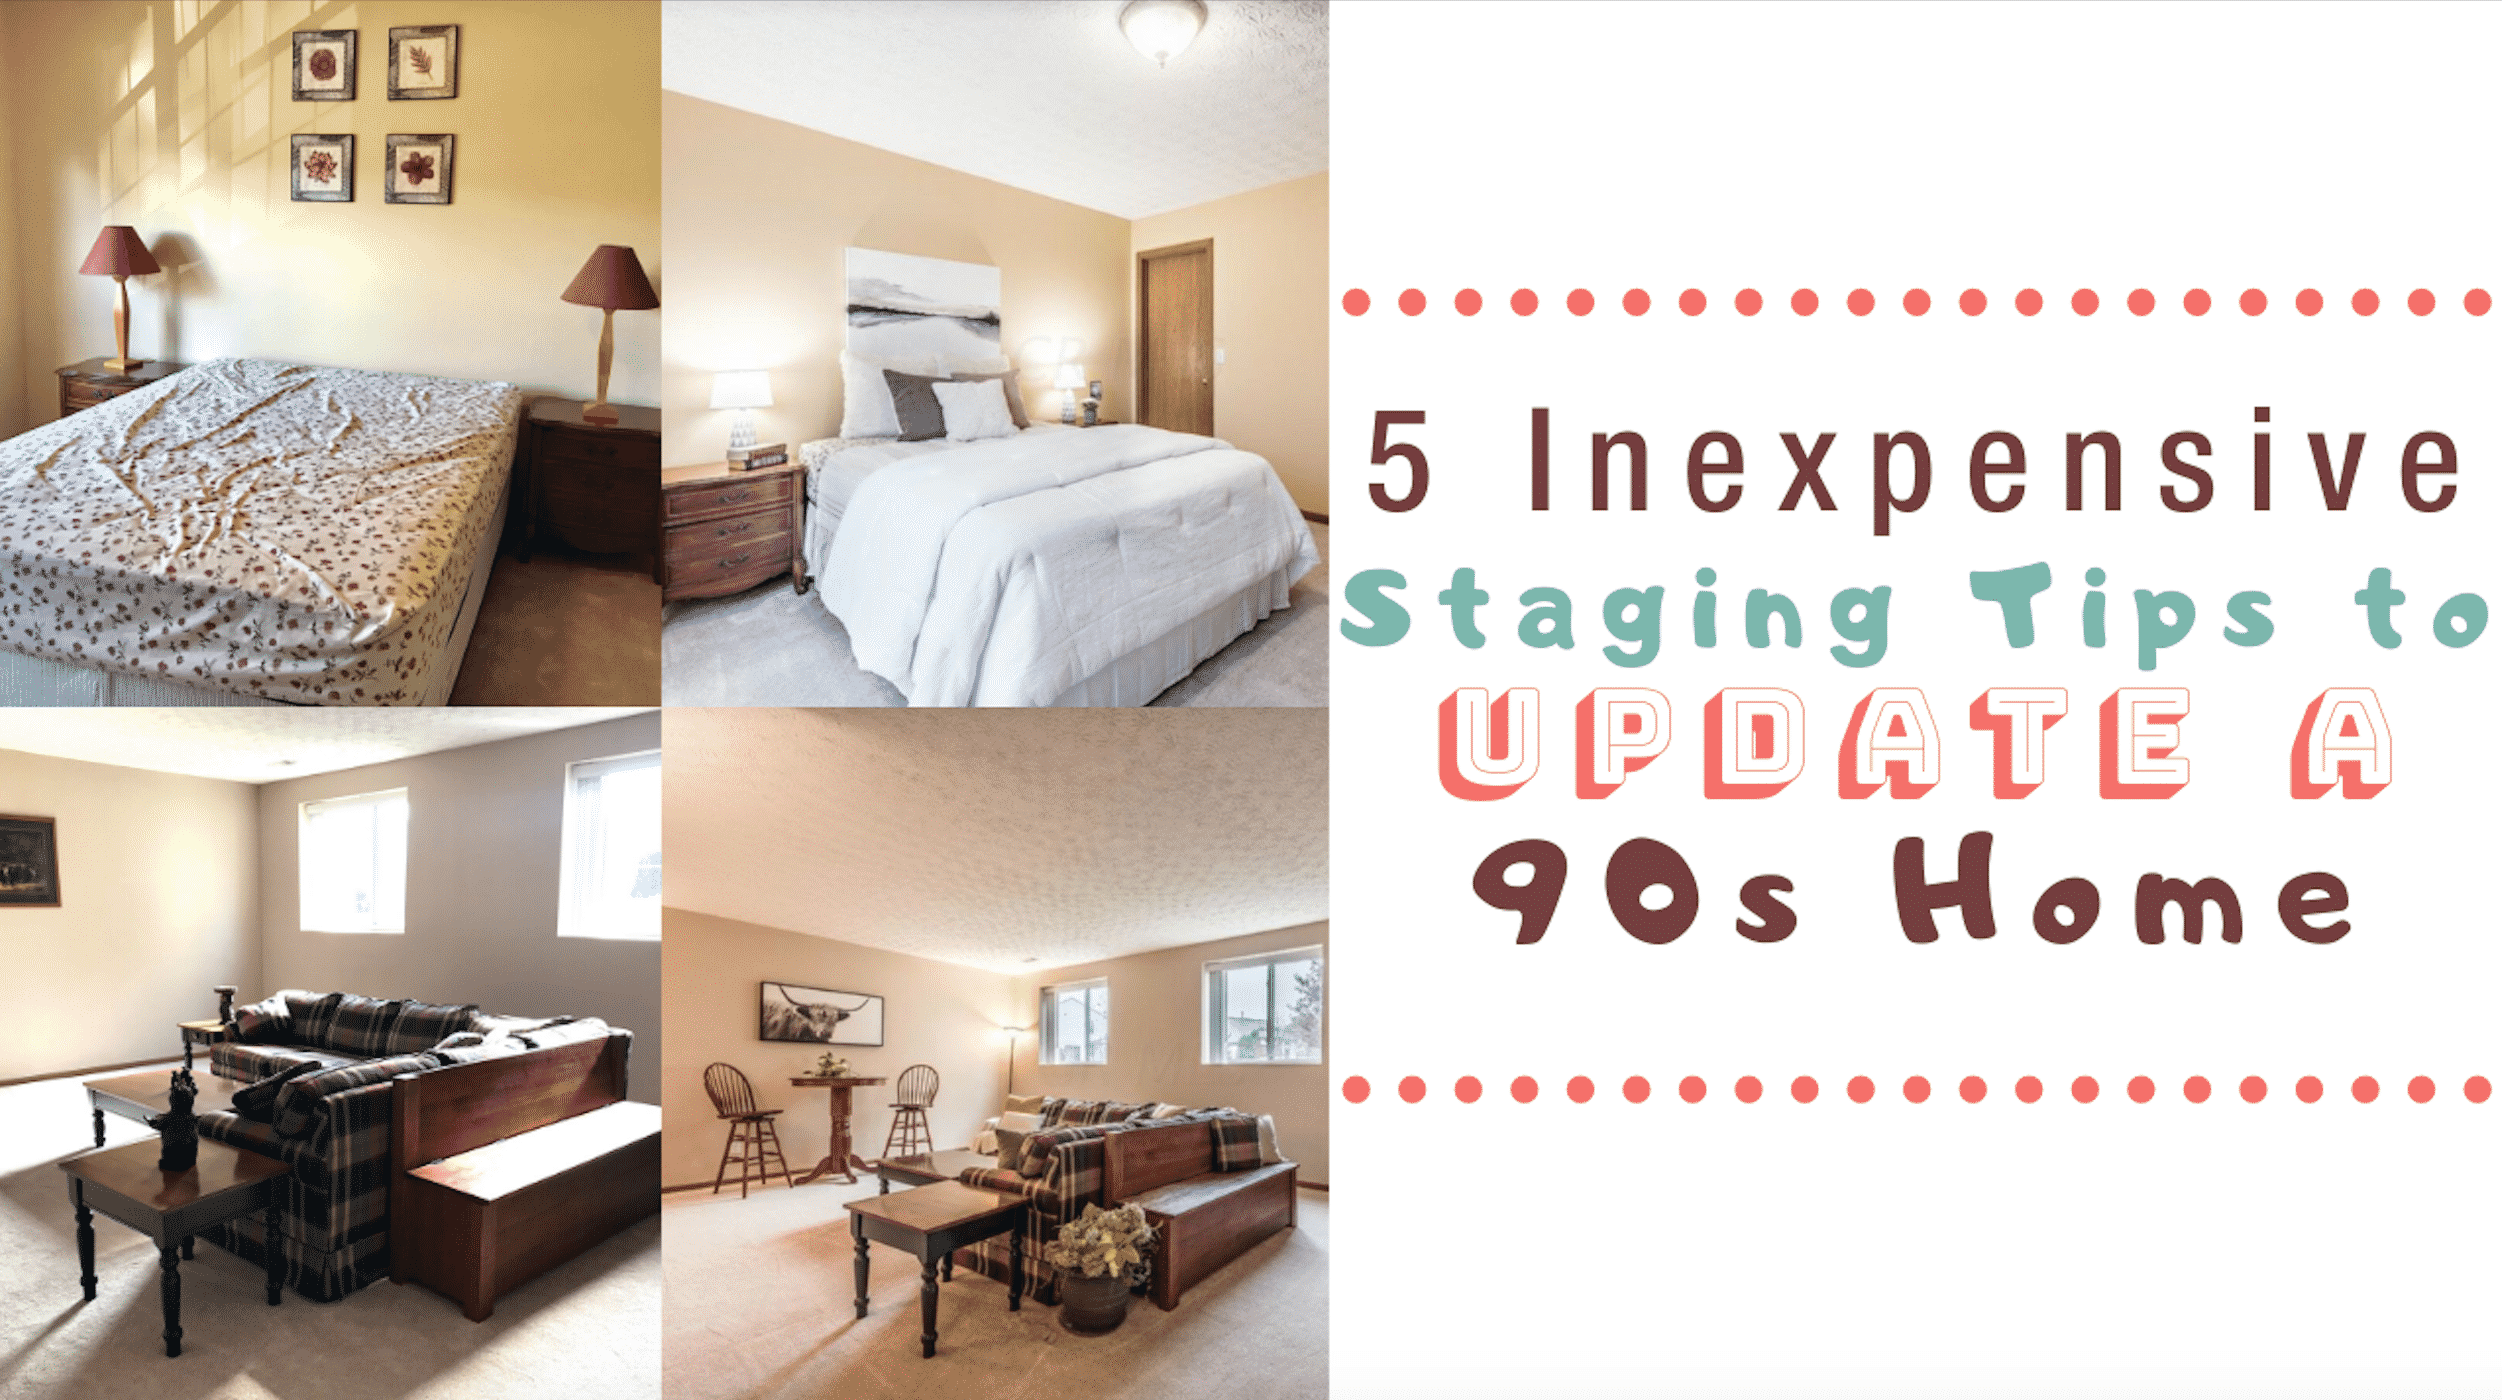 5_Inexpensive_Staging_Tips_to_Update_a_90s_Home